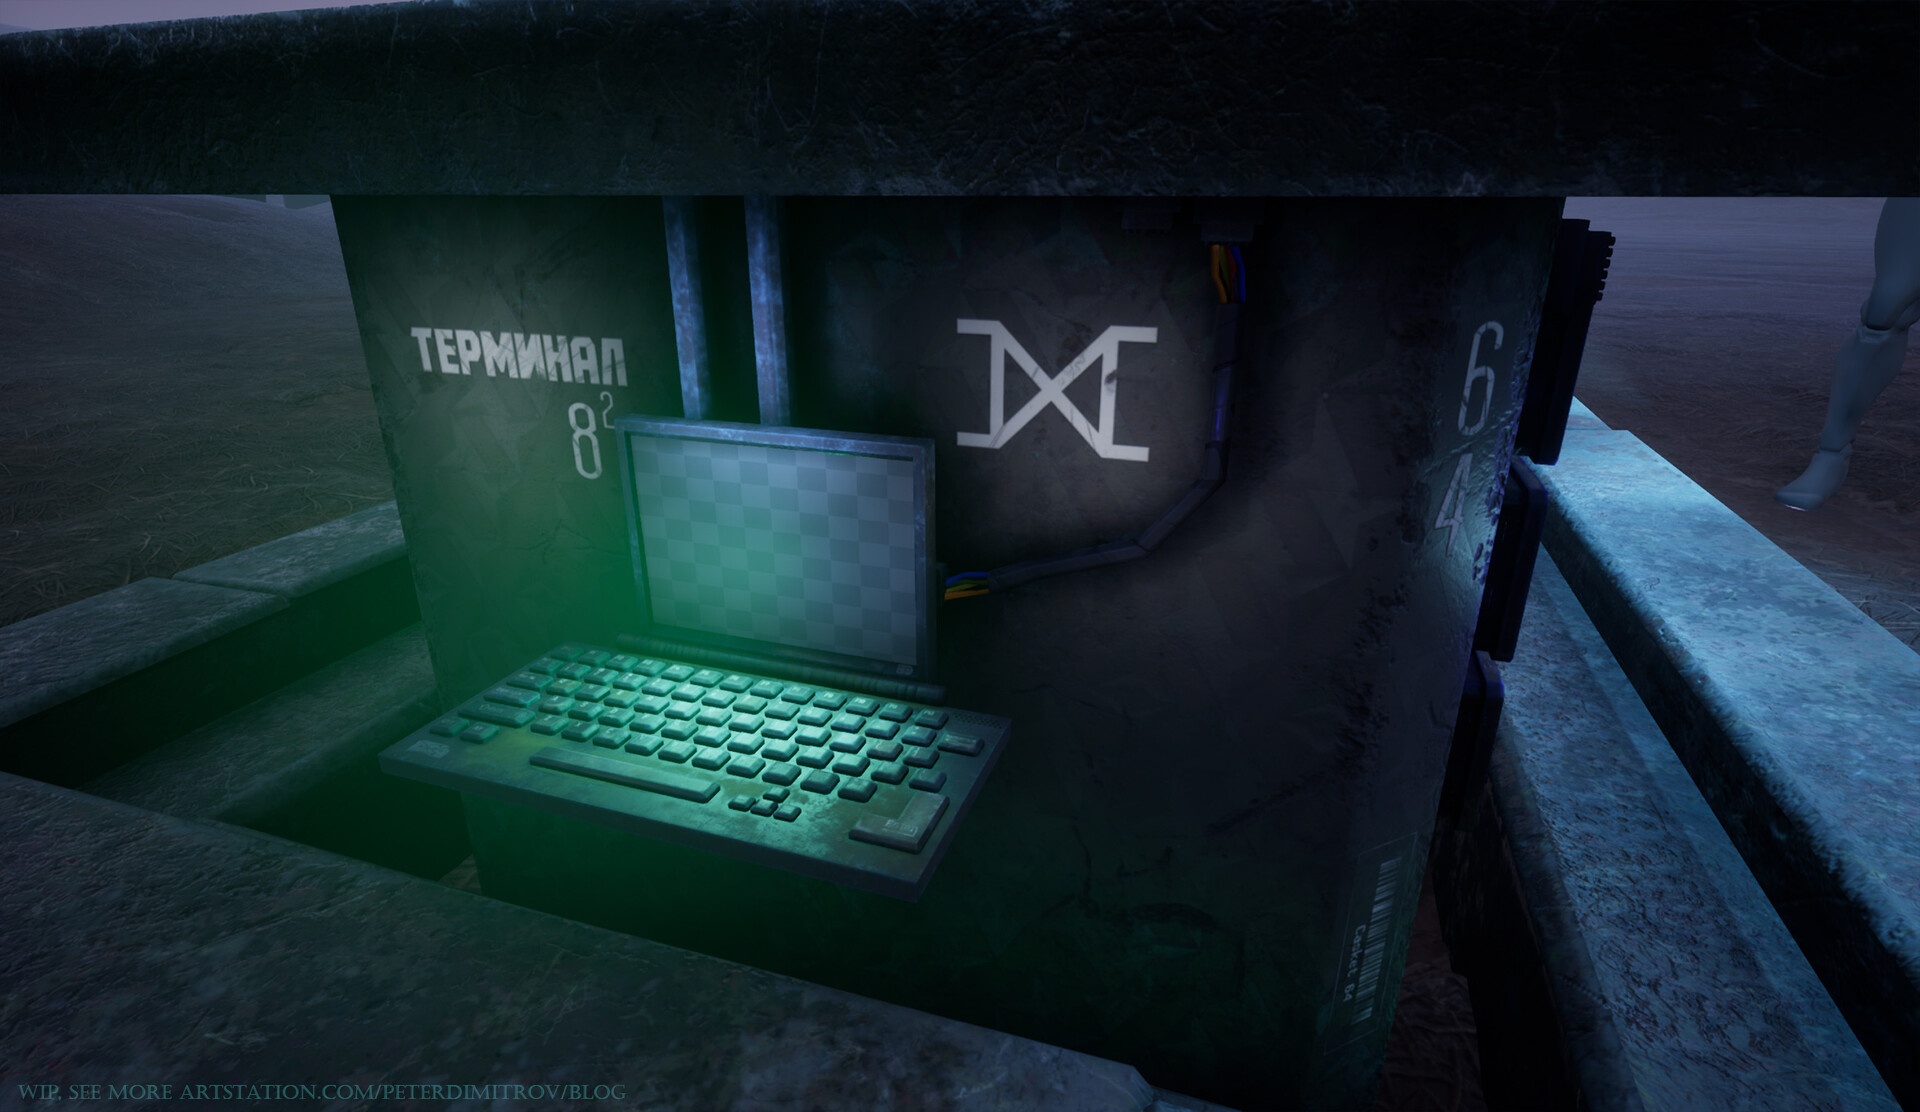 Close up shot of the terminal. Looks like an open laptop illuminated in hacker-like green light. The screen still has a placeholder checkerboard.